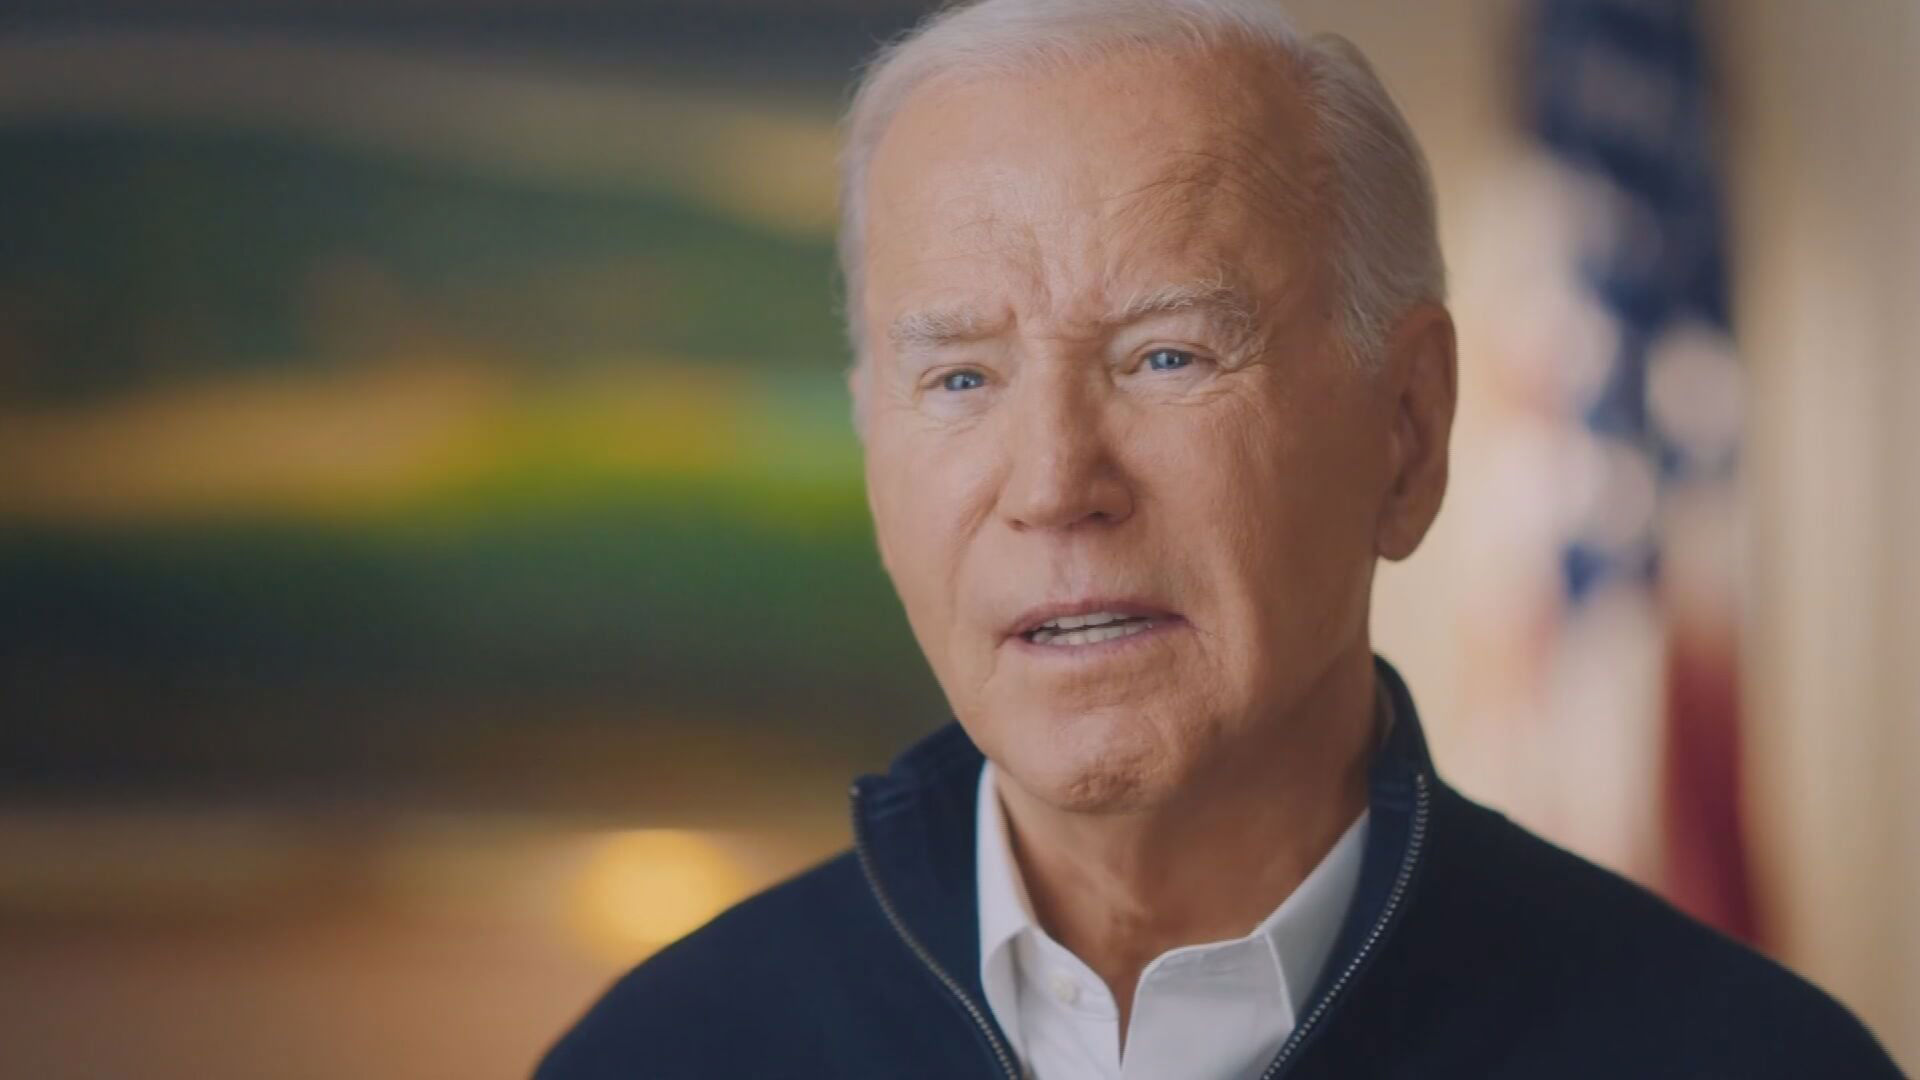 Biden campaign launches abortion ad in Arizona days after court ruling